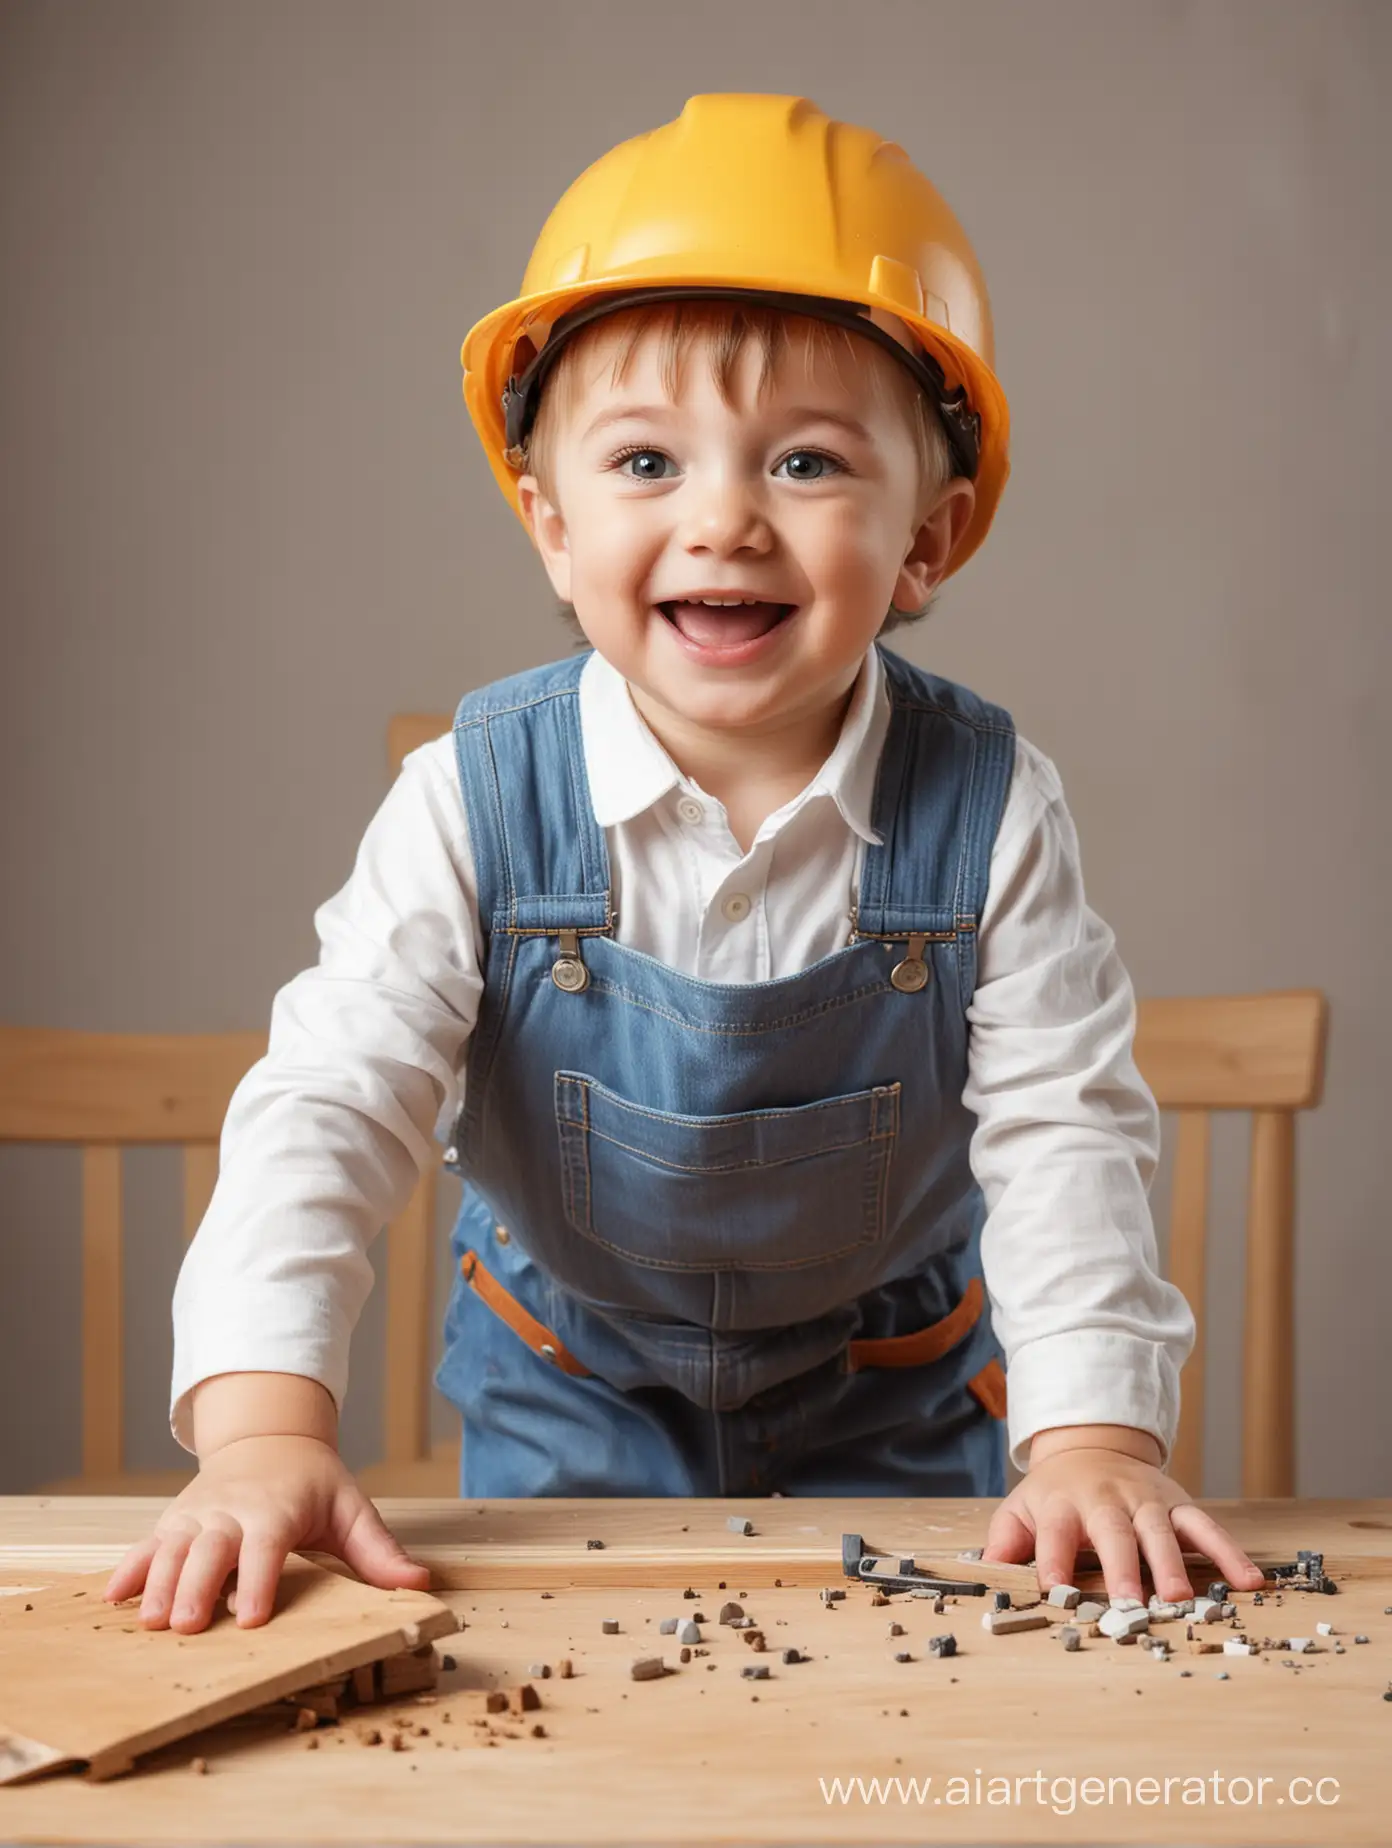 Joyful-Young-Boy-in-Construction-Attire-Engaged-in-Playful-Activity